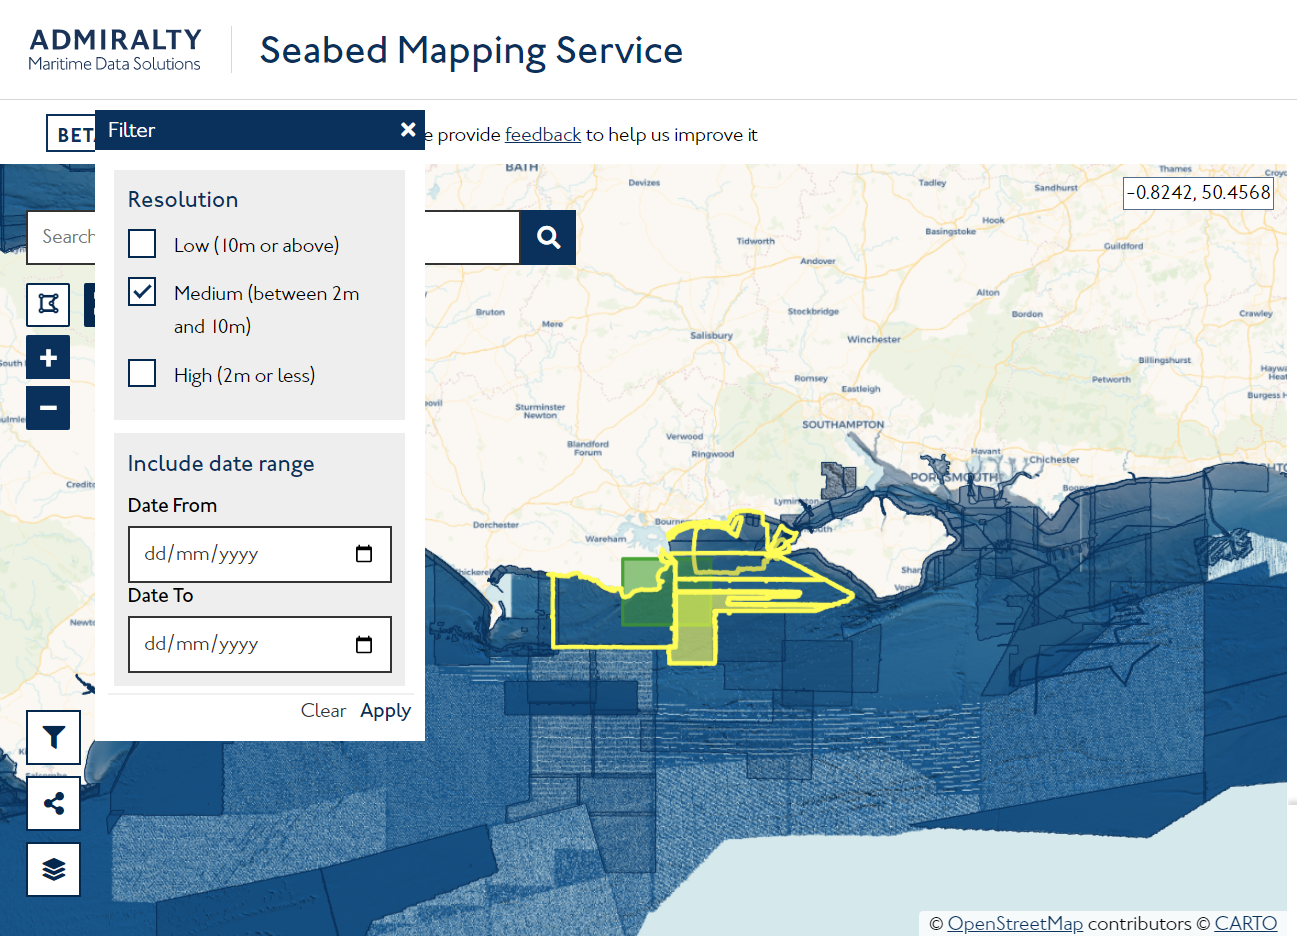 Seabed mapping app screenshot showing a highlighted area of water off the coast of Southampton